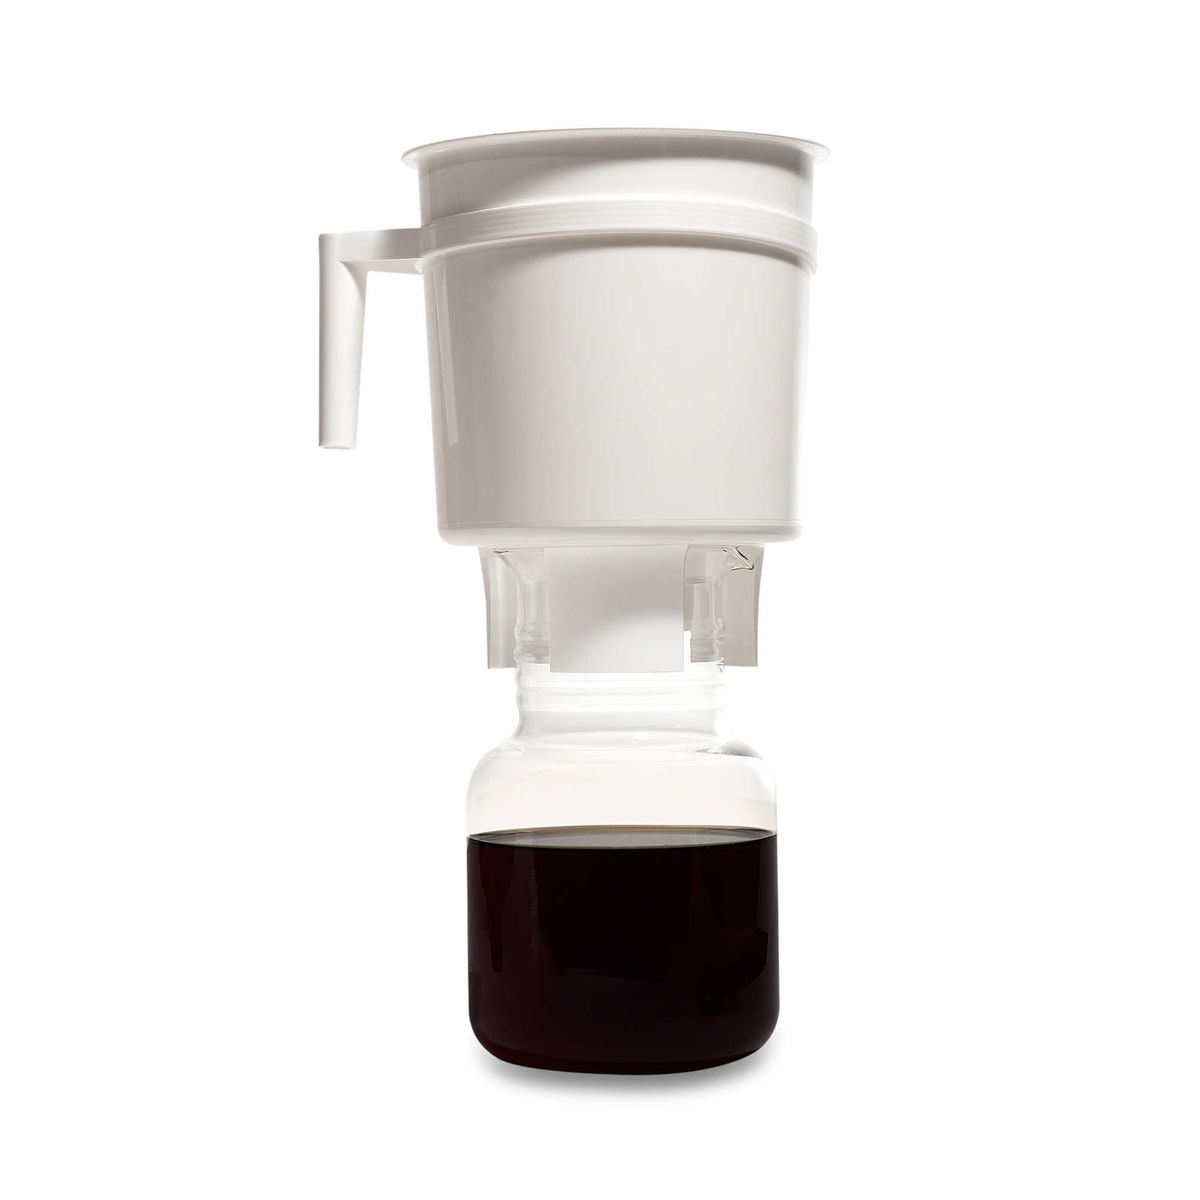 https://www.illy.com/on/demandware.static/-/Sites-masterCatalog_illycaffe/default/dw9e4bfe3f/products/Coffee-Machines/Machines-Filter/US20122_coffee-machines_filter-coffee_toddy-cold-brew-coffee-system_illy-shop/toddy-cold-brew-coffee-system.jpg